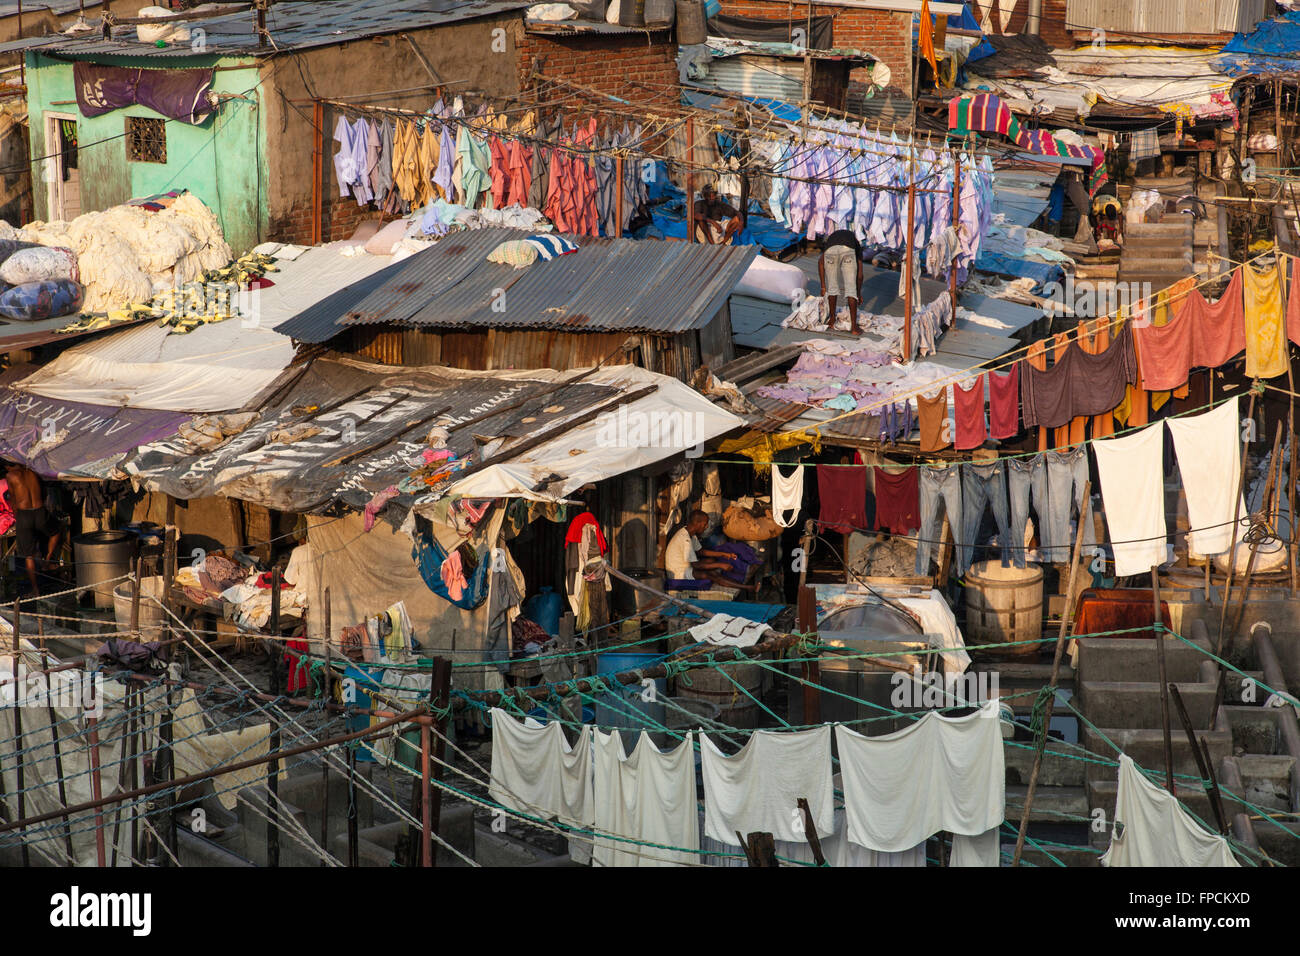 a-view-from-above-of-a-slum-in-mumbai-in-india-people-can-be-seen-FPCKXD.jpg